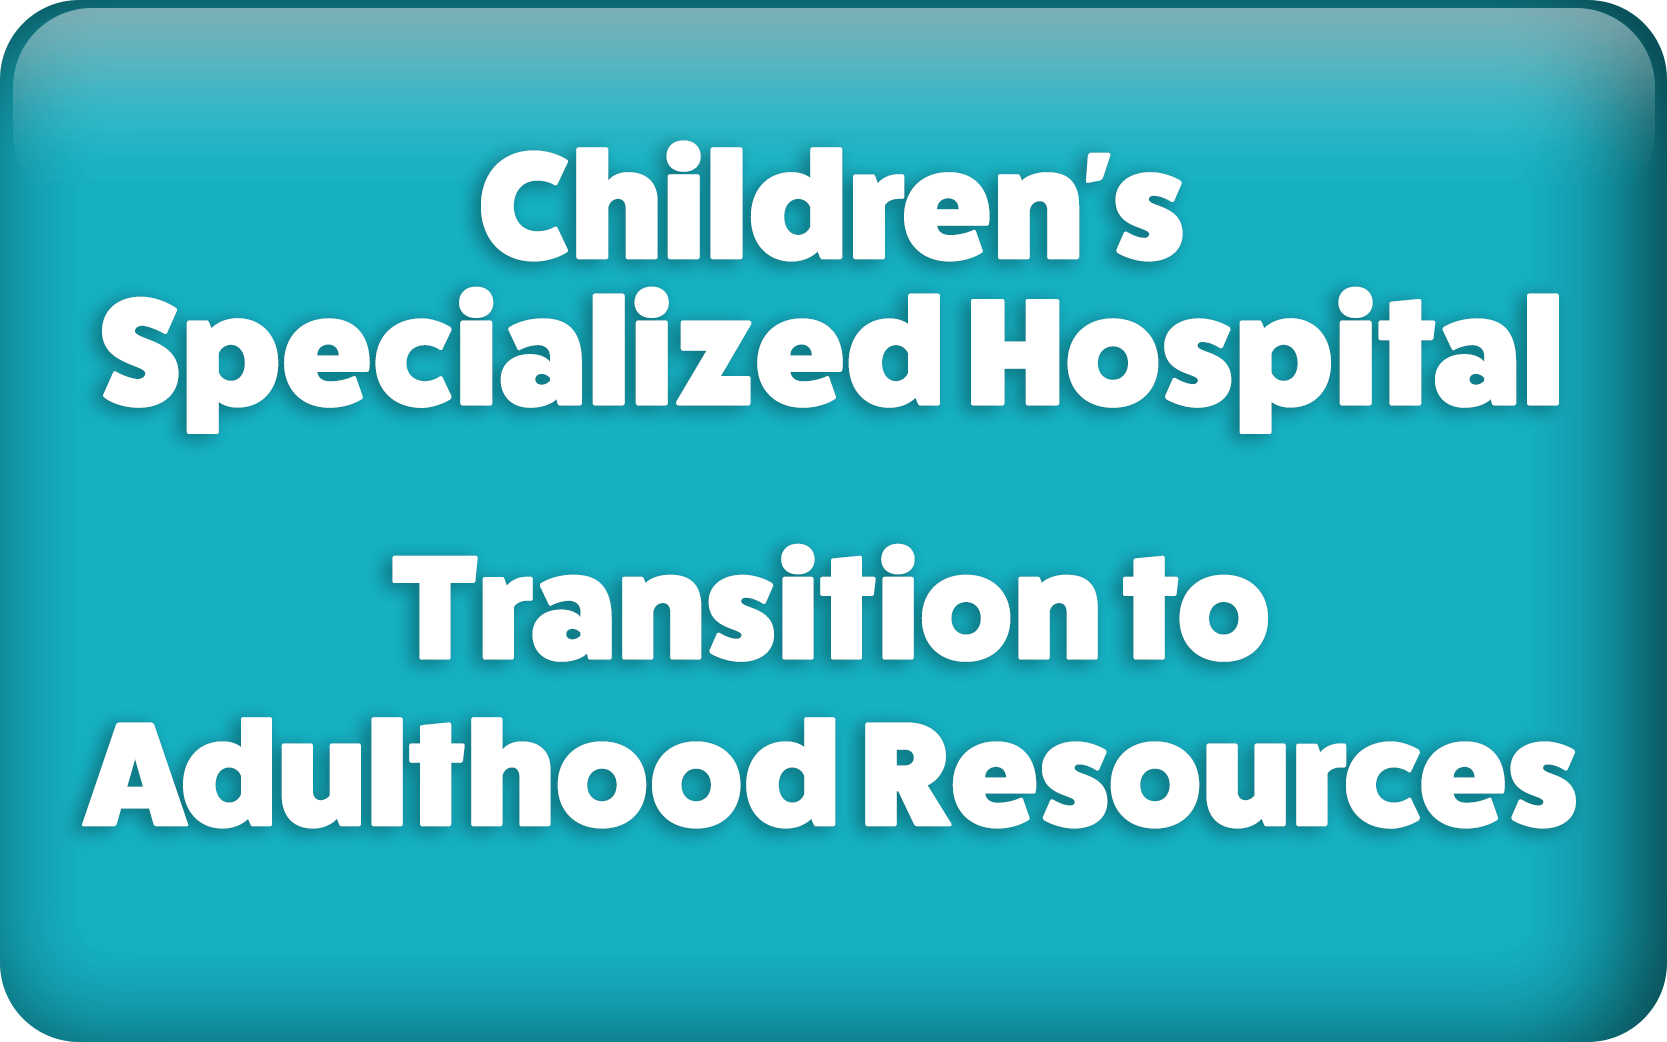 Children's Specialized Hospital Transition to Adulthood Resources